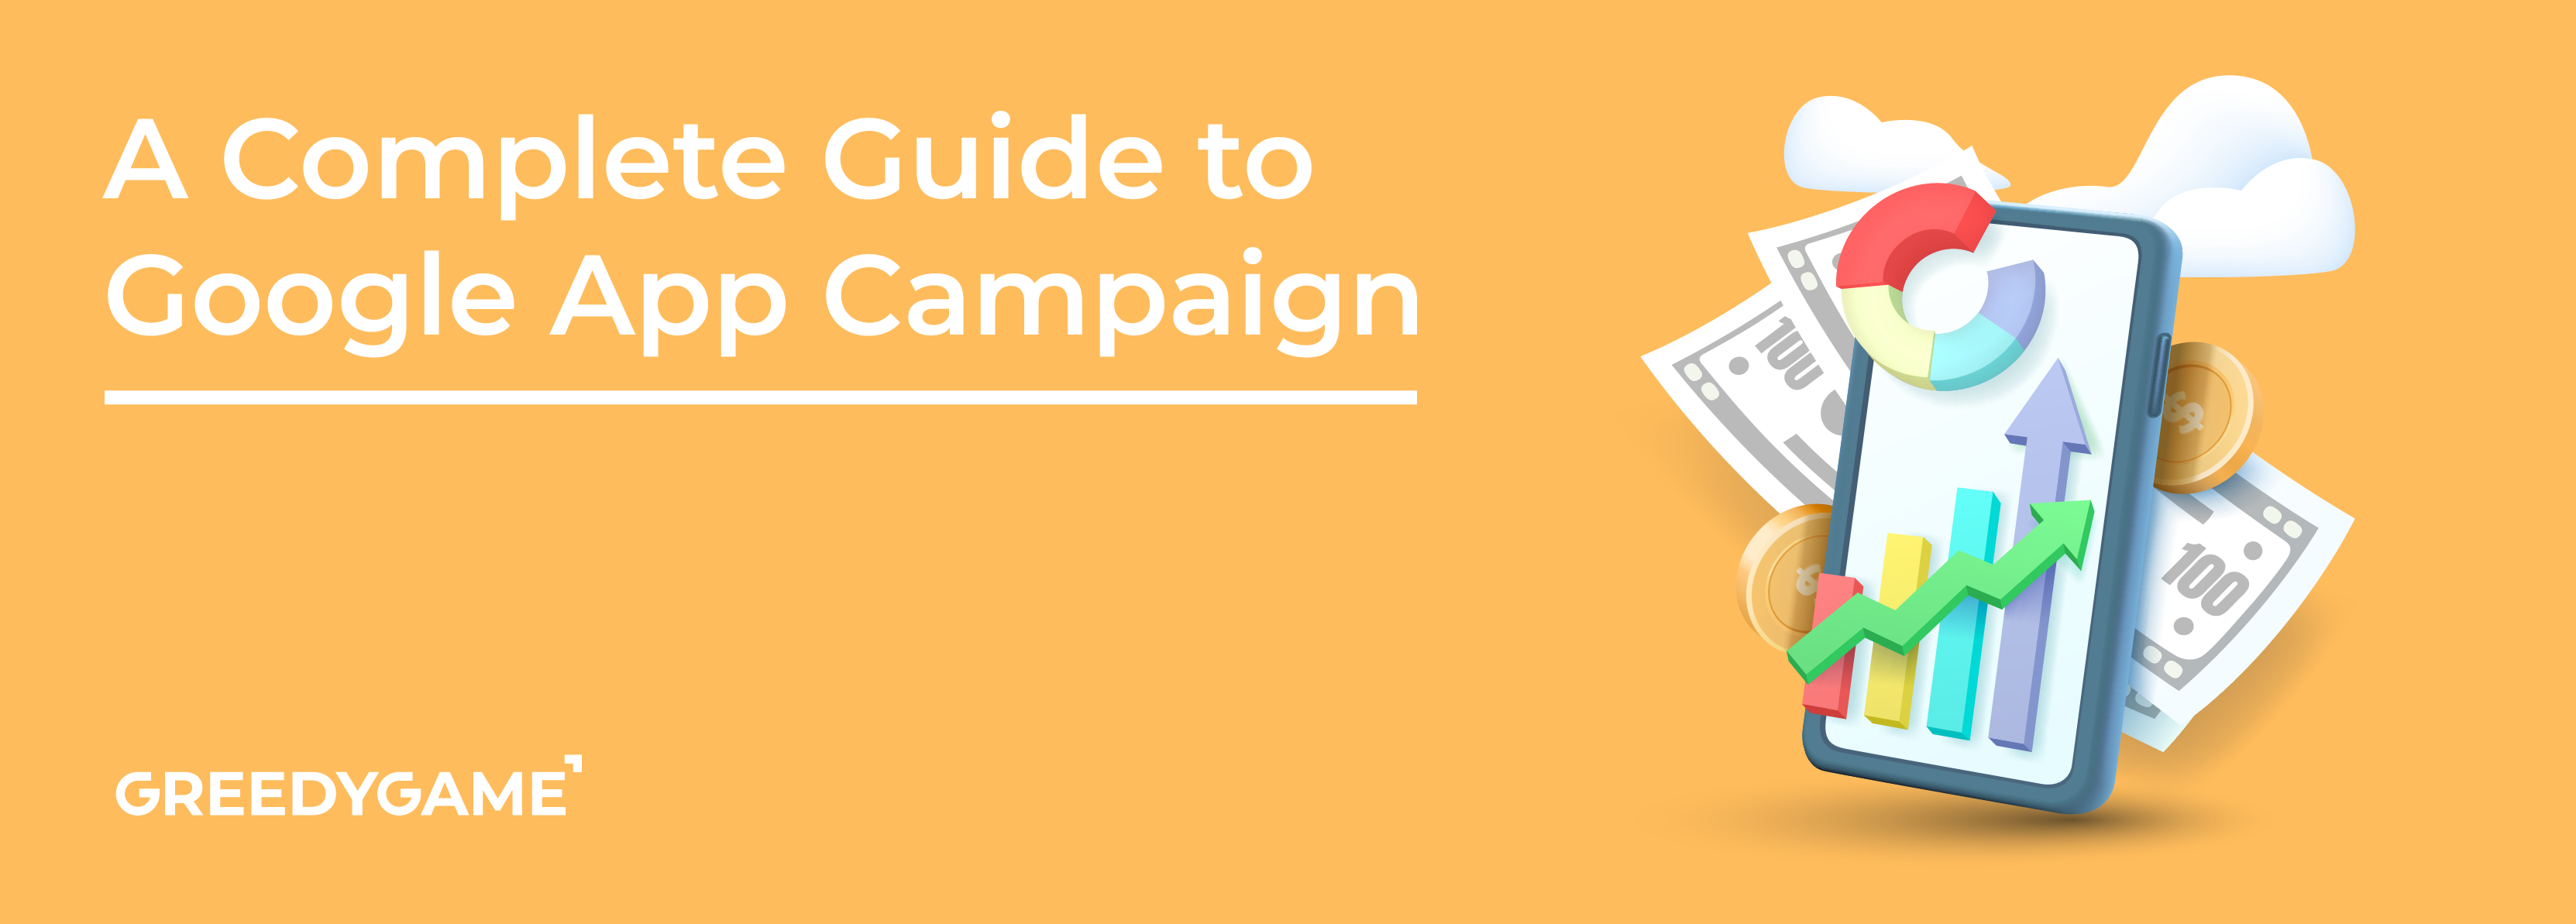 A Complete Guide to Google App Campaign